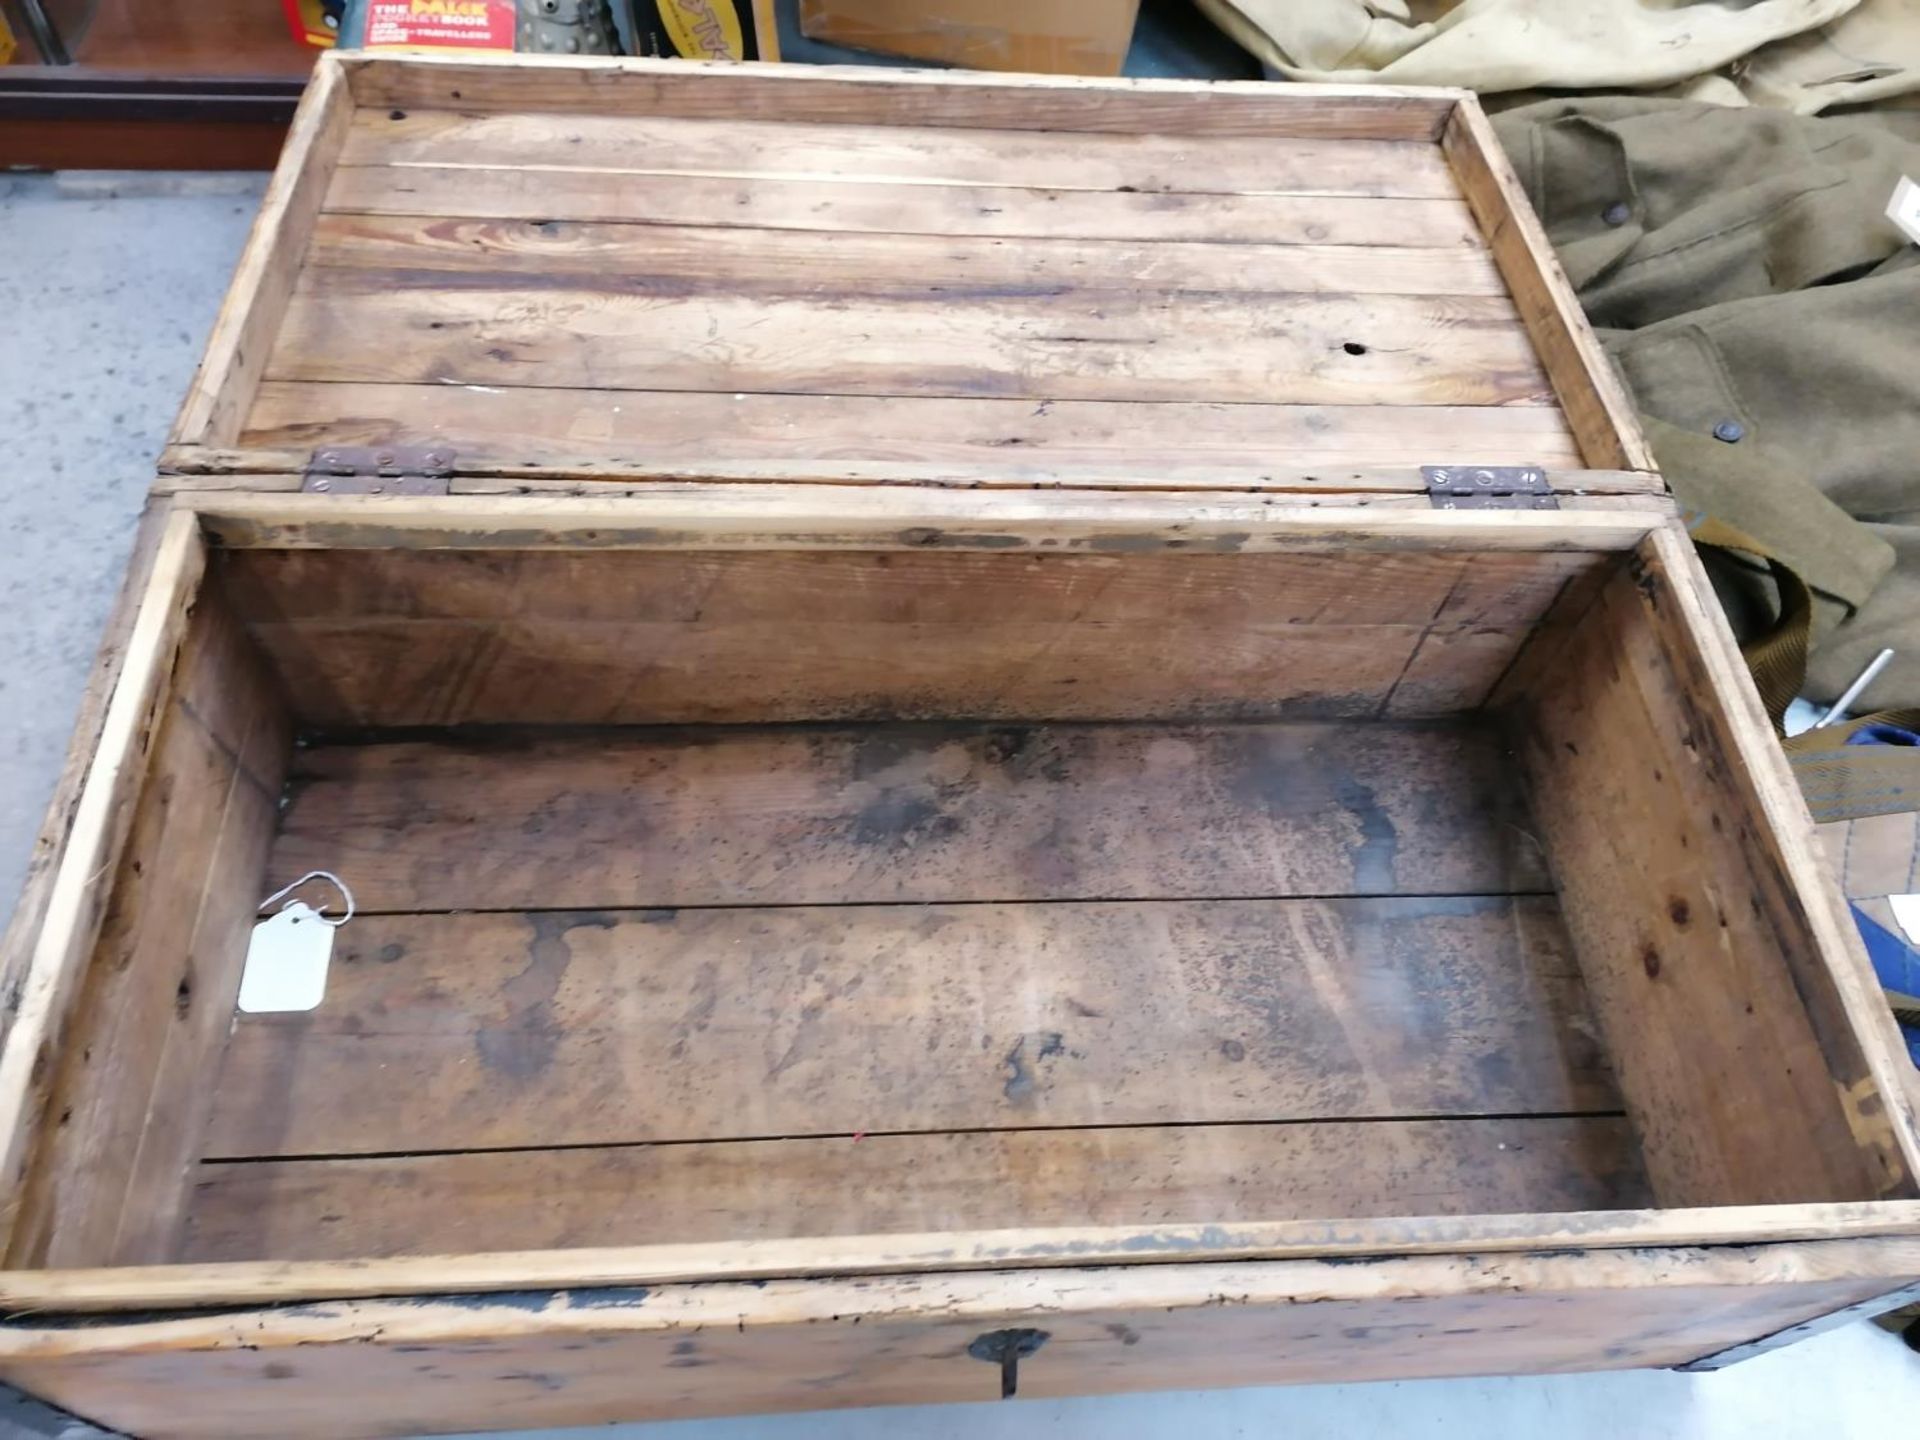 A VINTAGE FRENCH OAK GUN AMMO CHEST WITH METAL BANDING AND TWO METAL SIDE HANDLES - Image 2 of 3